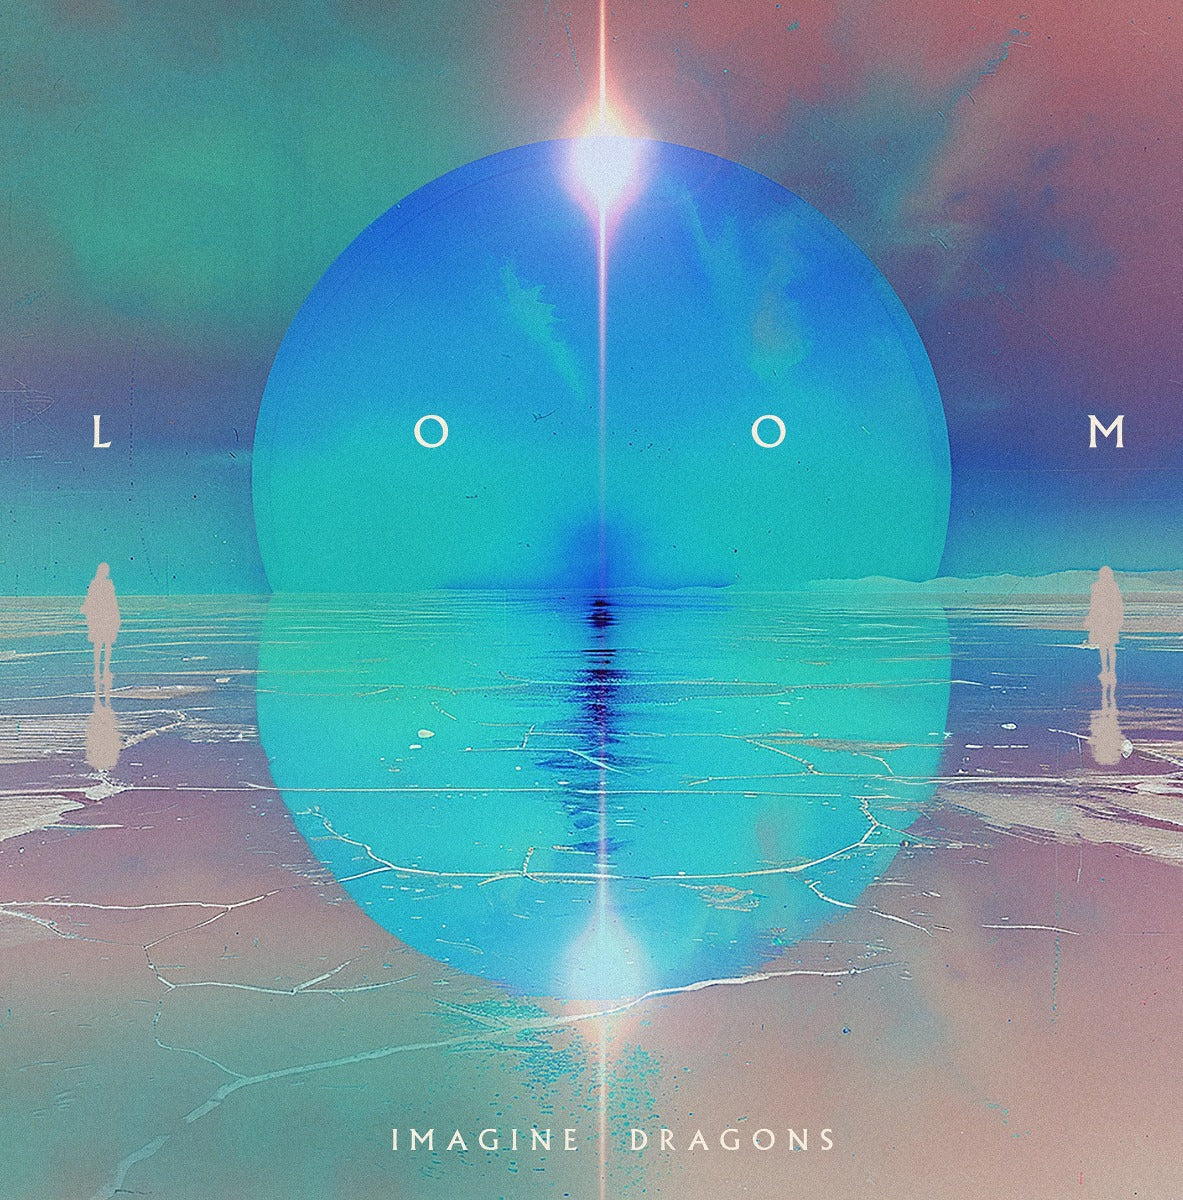 LOOM (Indie Exclusive, Limited Edition, Translucent Curacao Colored Vinyl, Alternate Cover) [Vinyl]